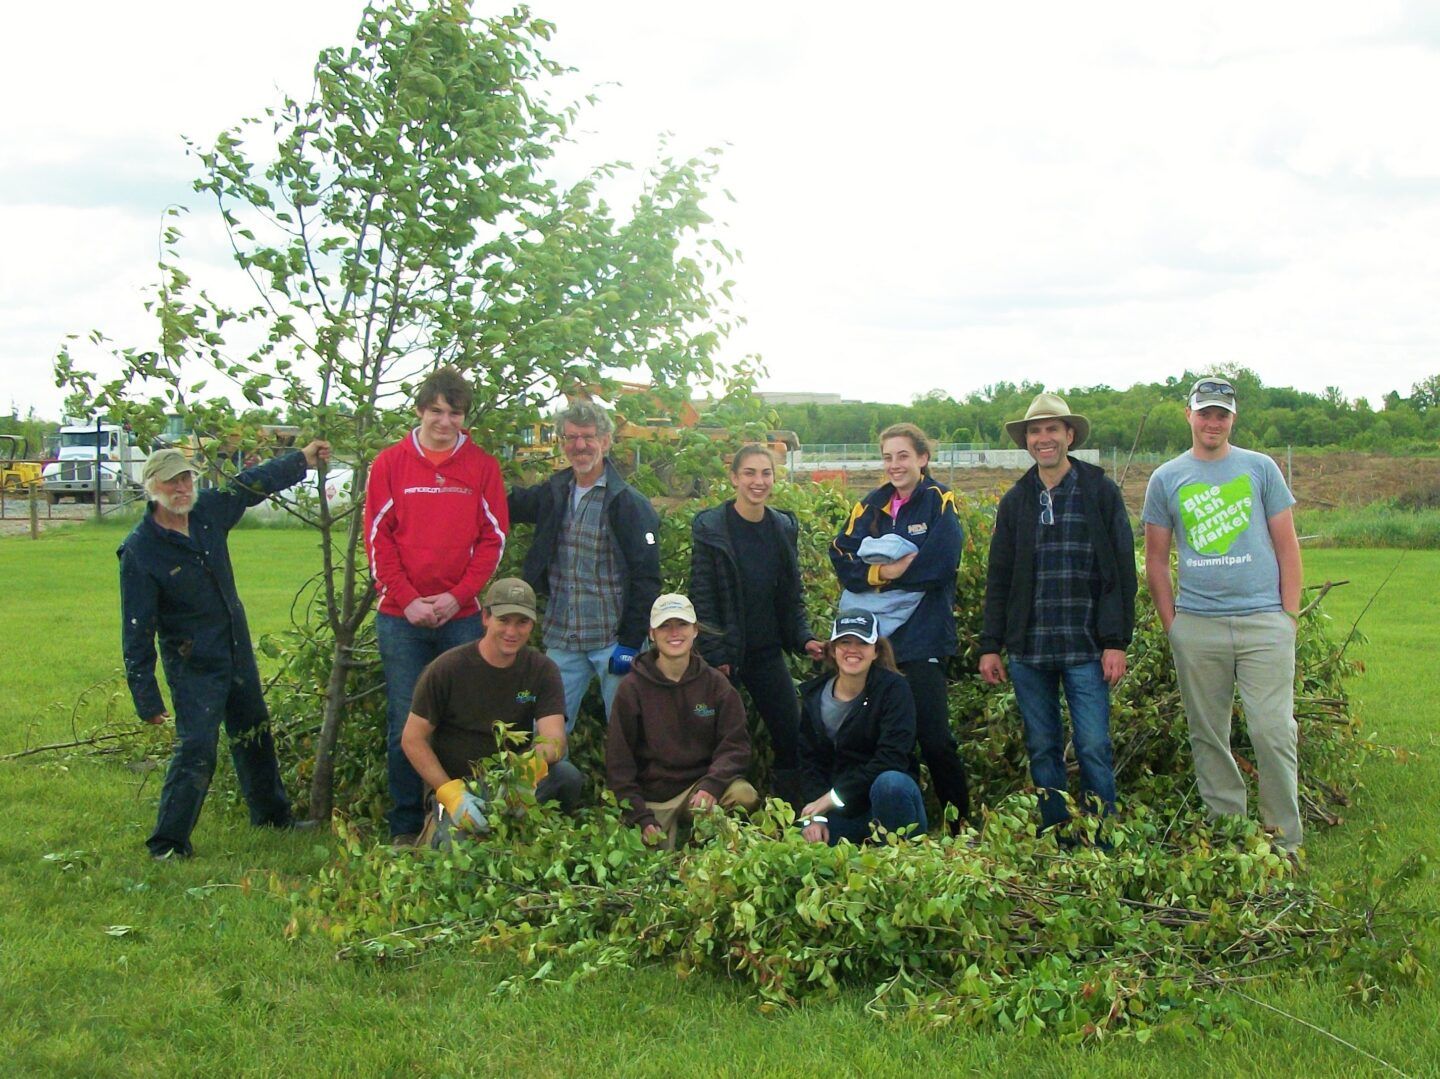 ORF and Volunteers at an Invasive Species Event